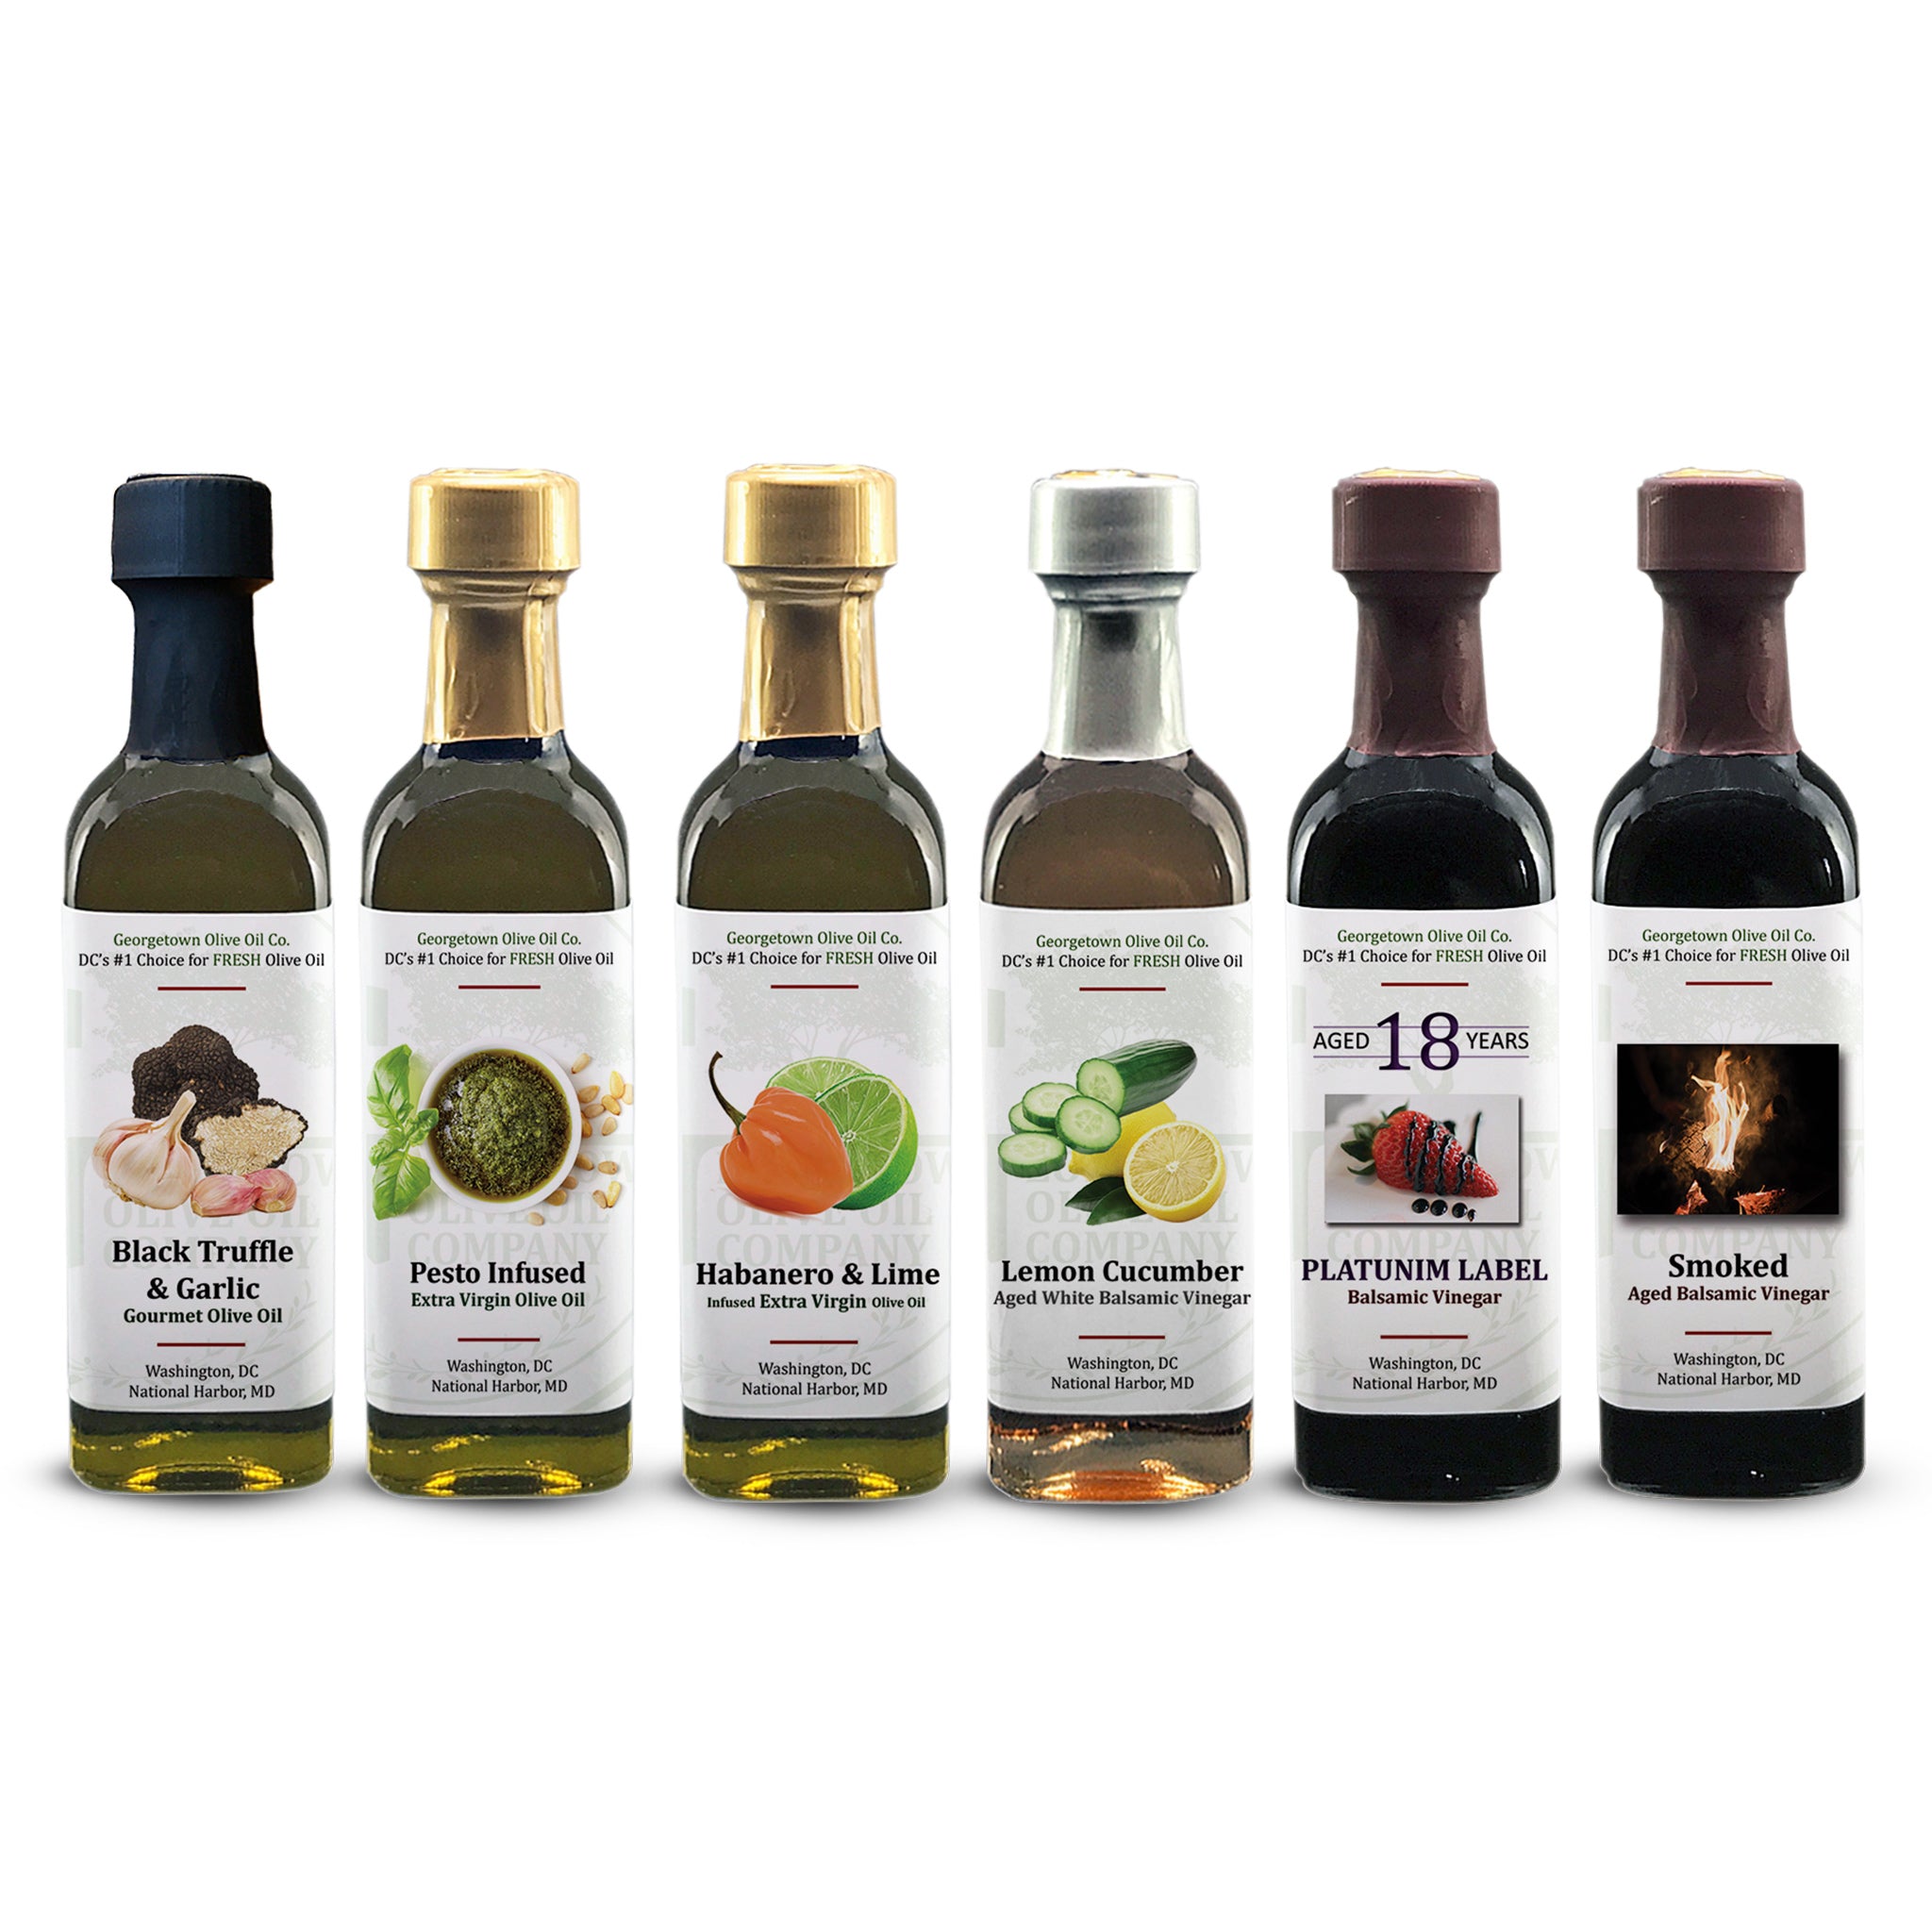 Georgetown Signature Collection Oil and Vinegar Variety Pack